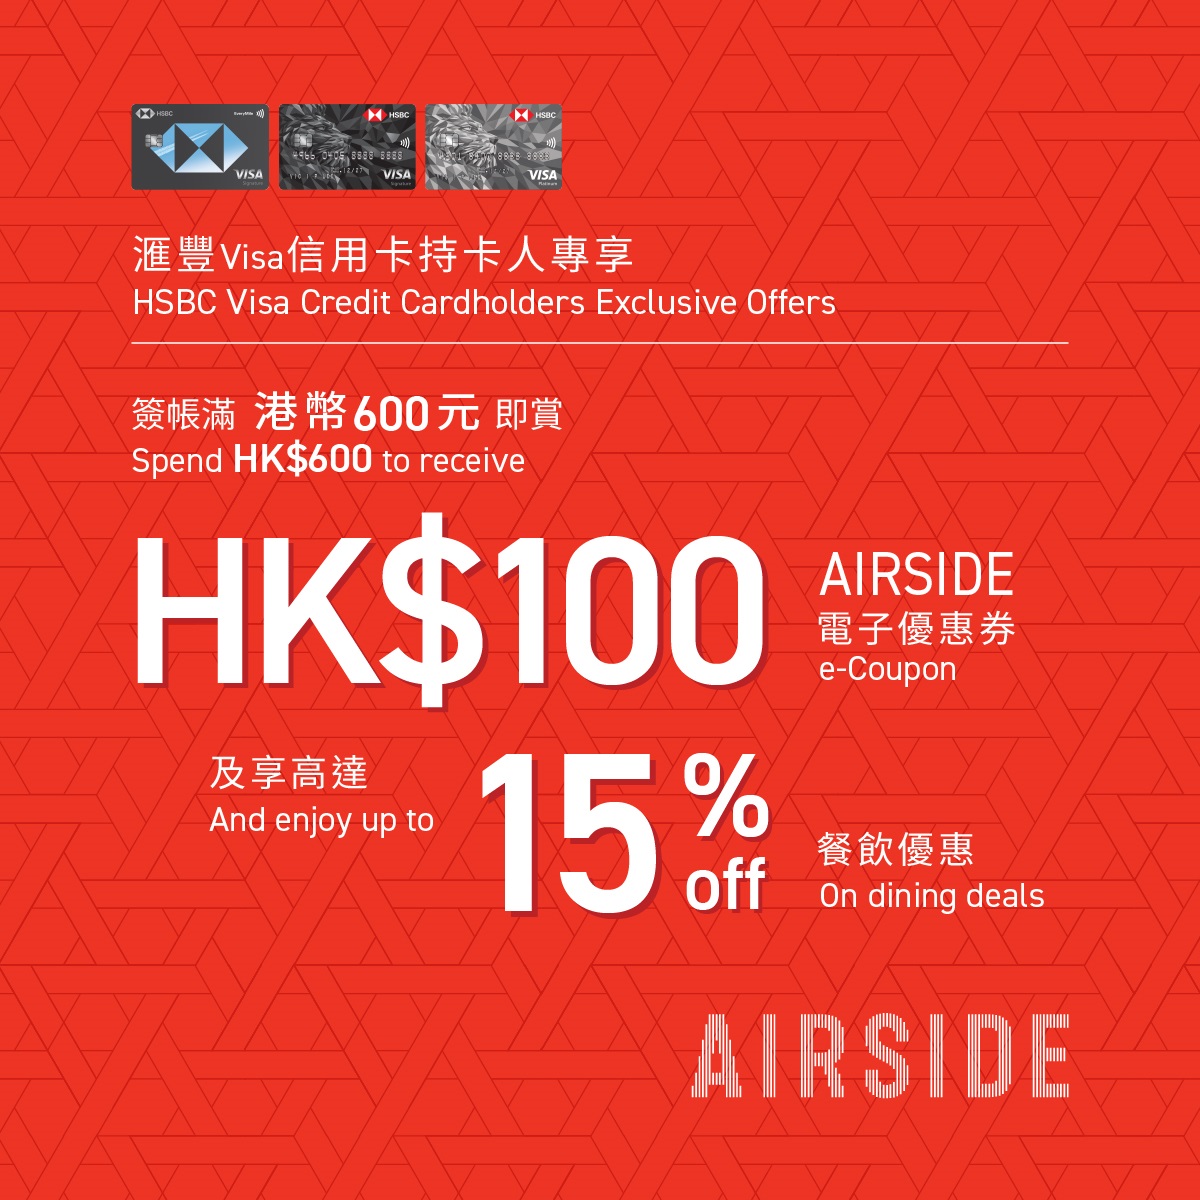 HSBC Visa Credit Cardholders Exclusive Spending & Dining Offers